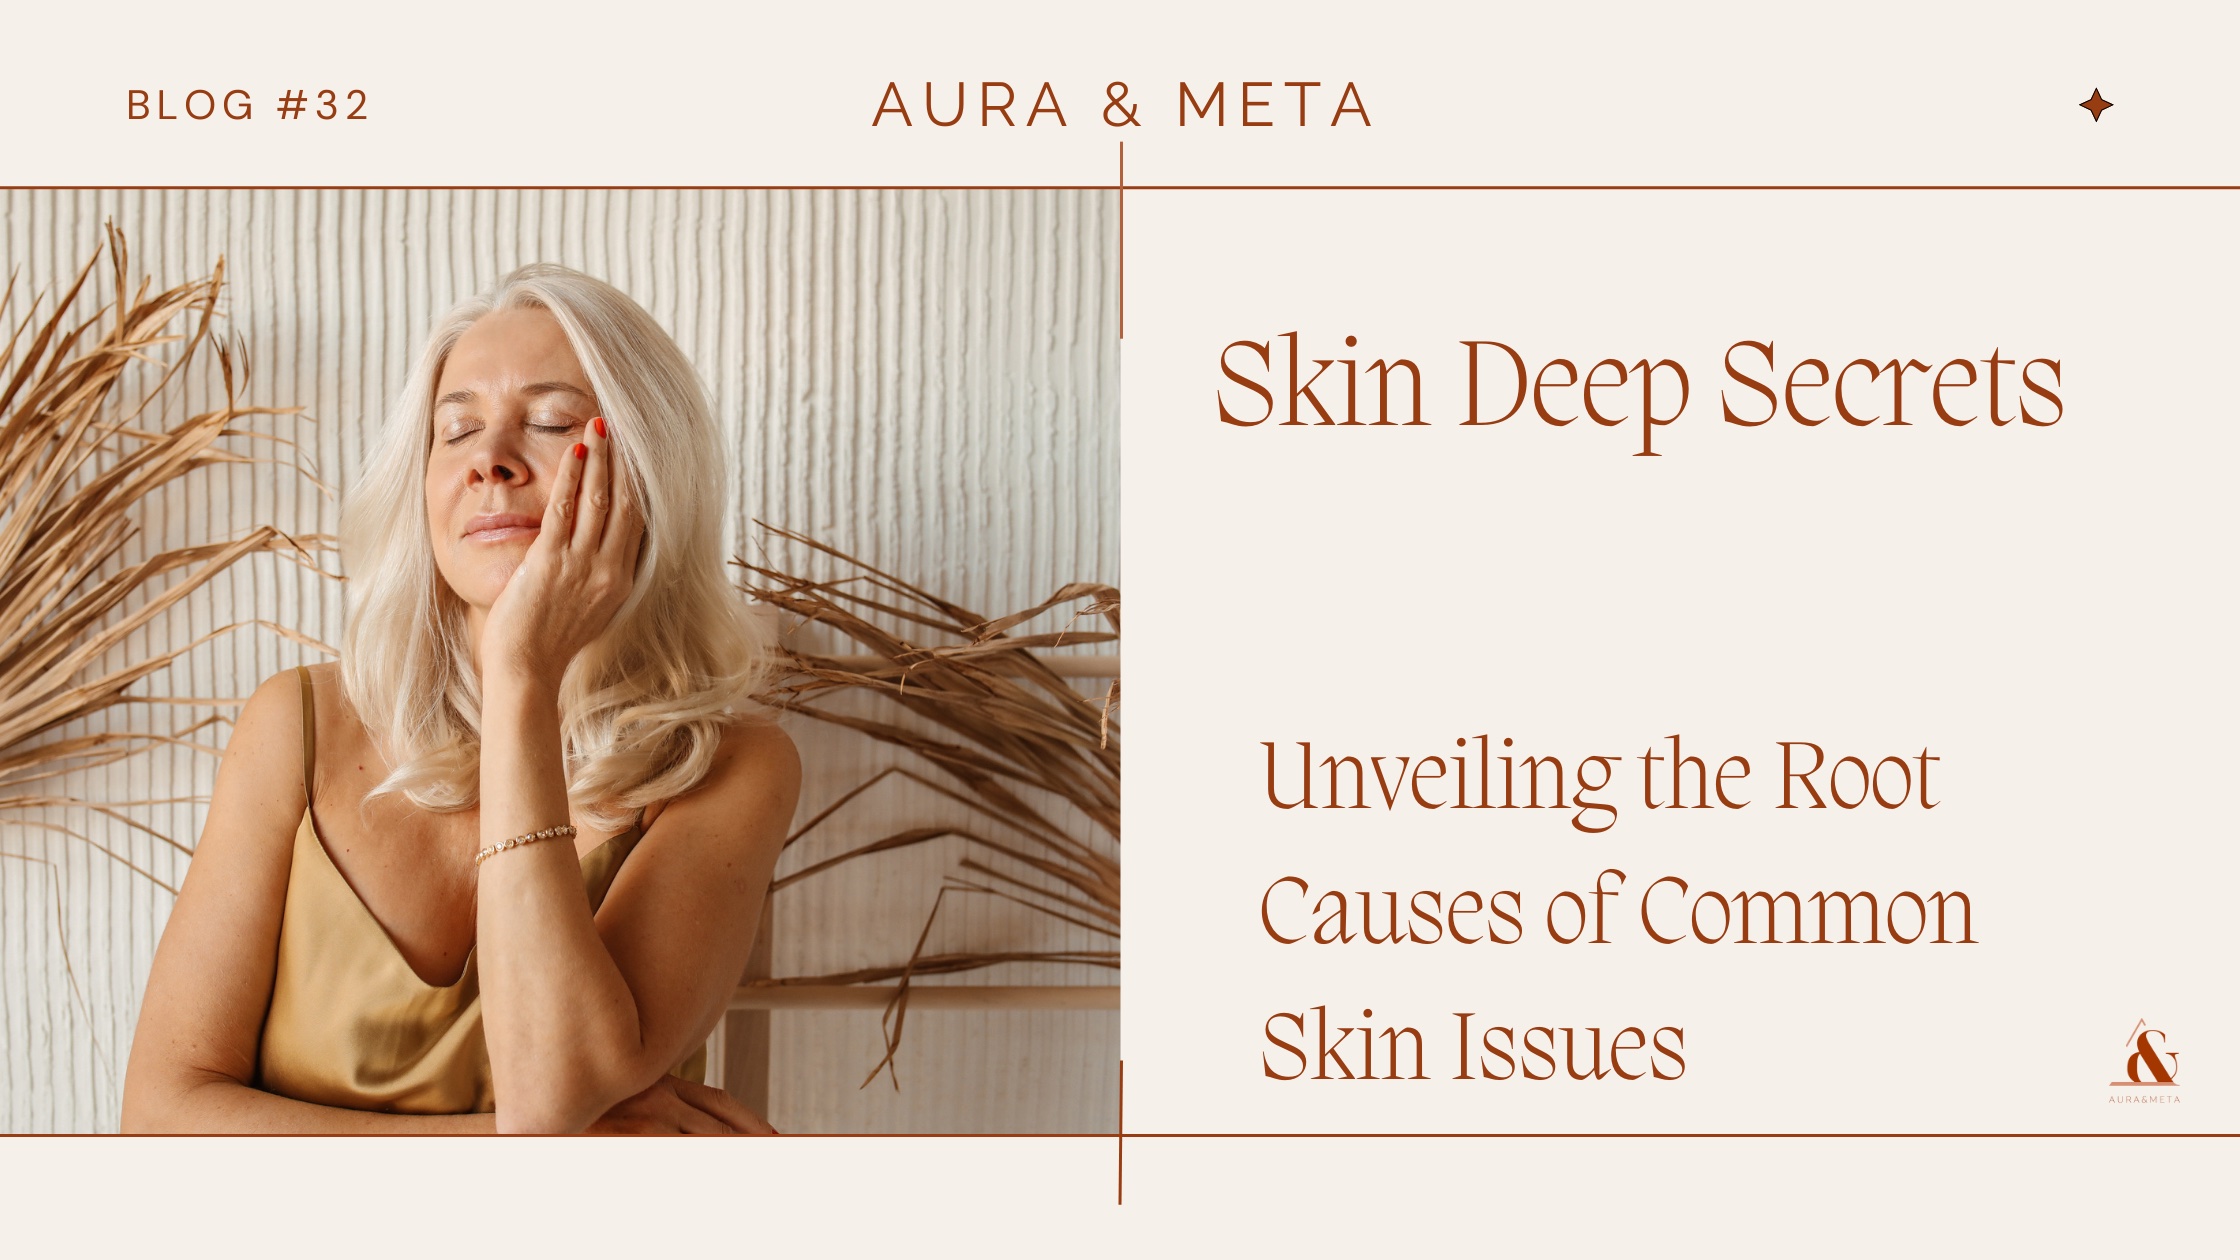 Skin Deep Secrets: Exploring Holistic Solutions for Common Skin Issues